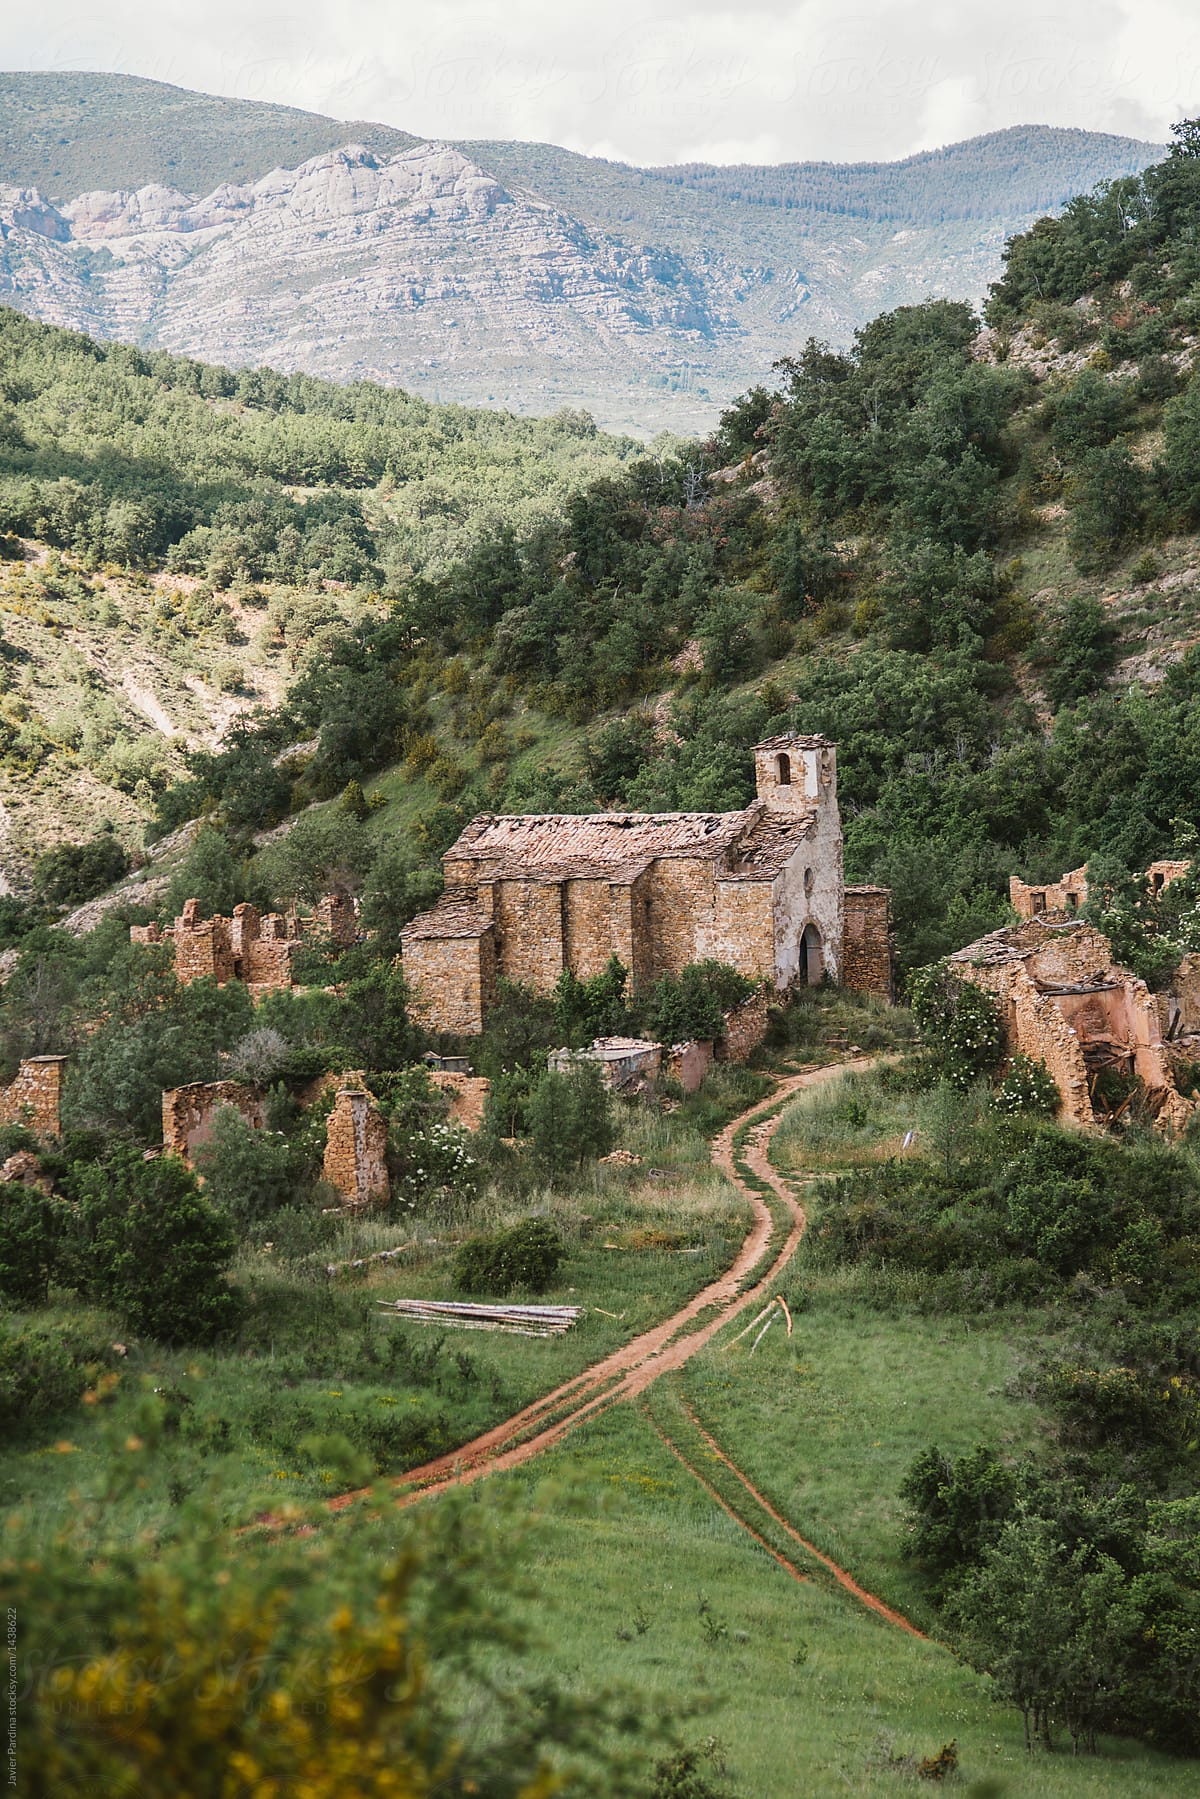 Abandoned village of Iscles, Huesca, Spain.